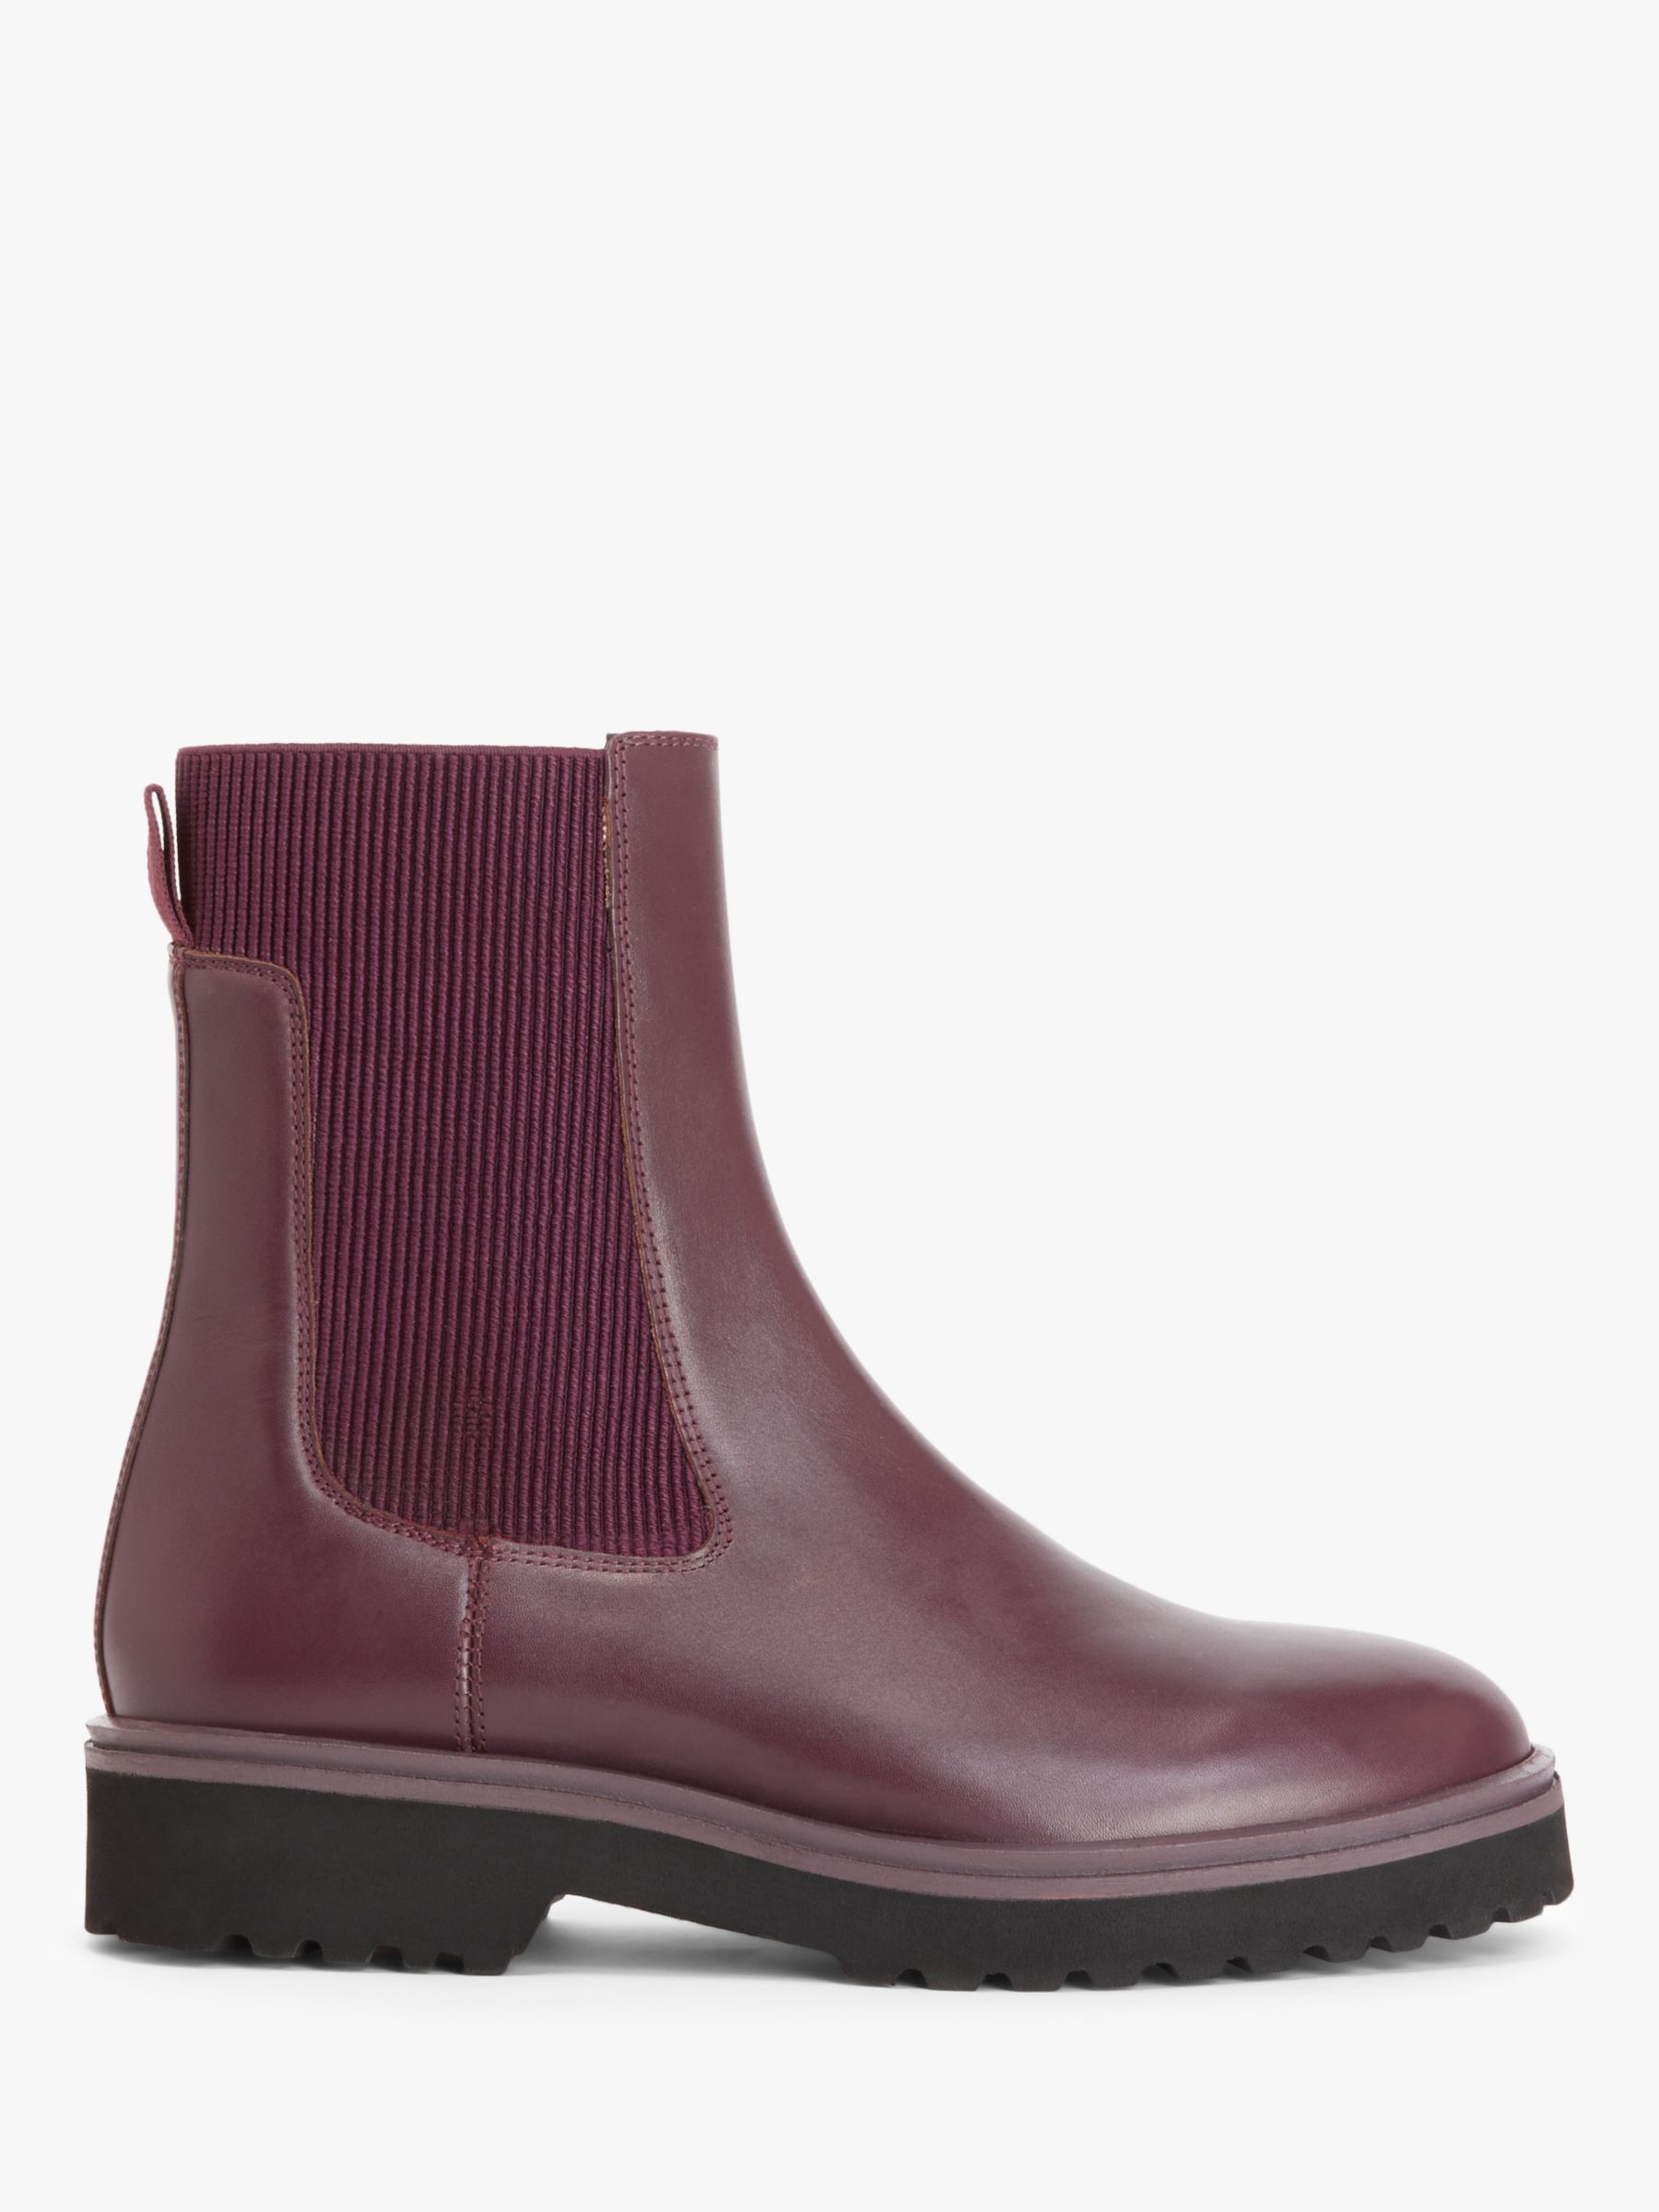 John Lewis ANYDAY Purcell Leather Chelsea Boots, Burgundy at John Lewis ...